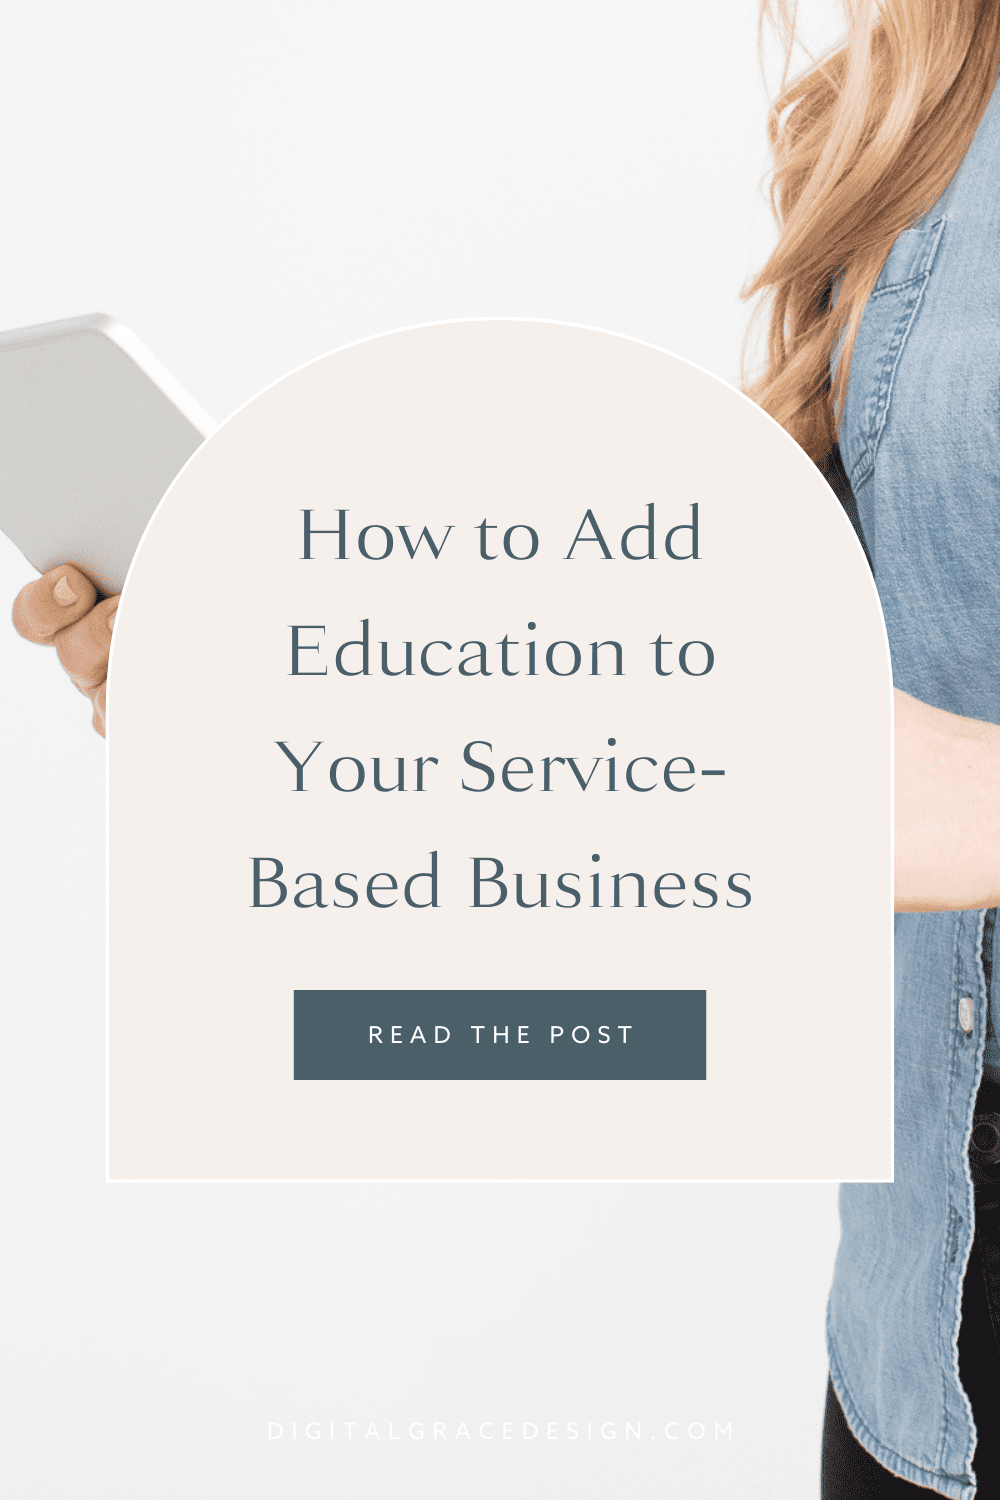 How to Add Education to Your Service-Based Business